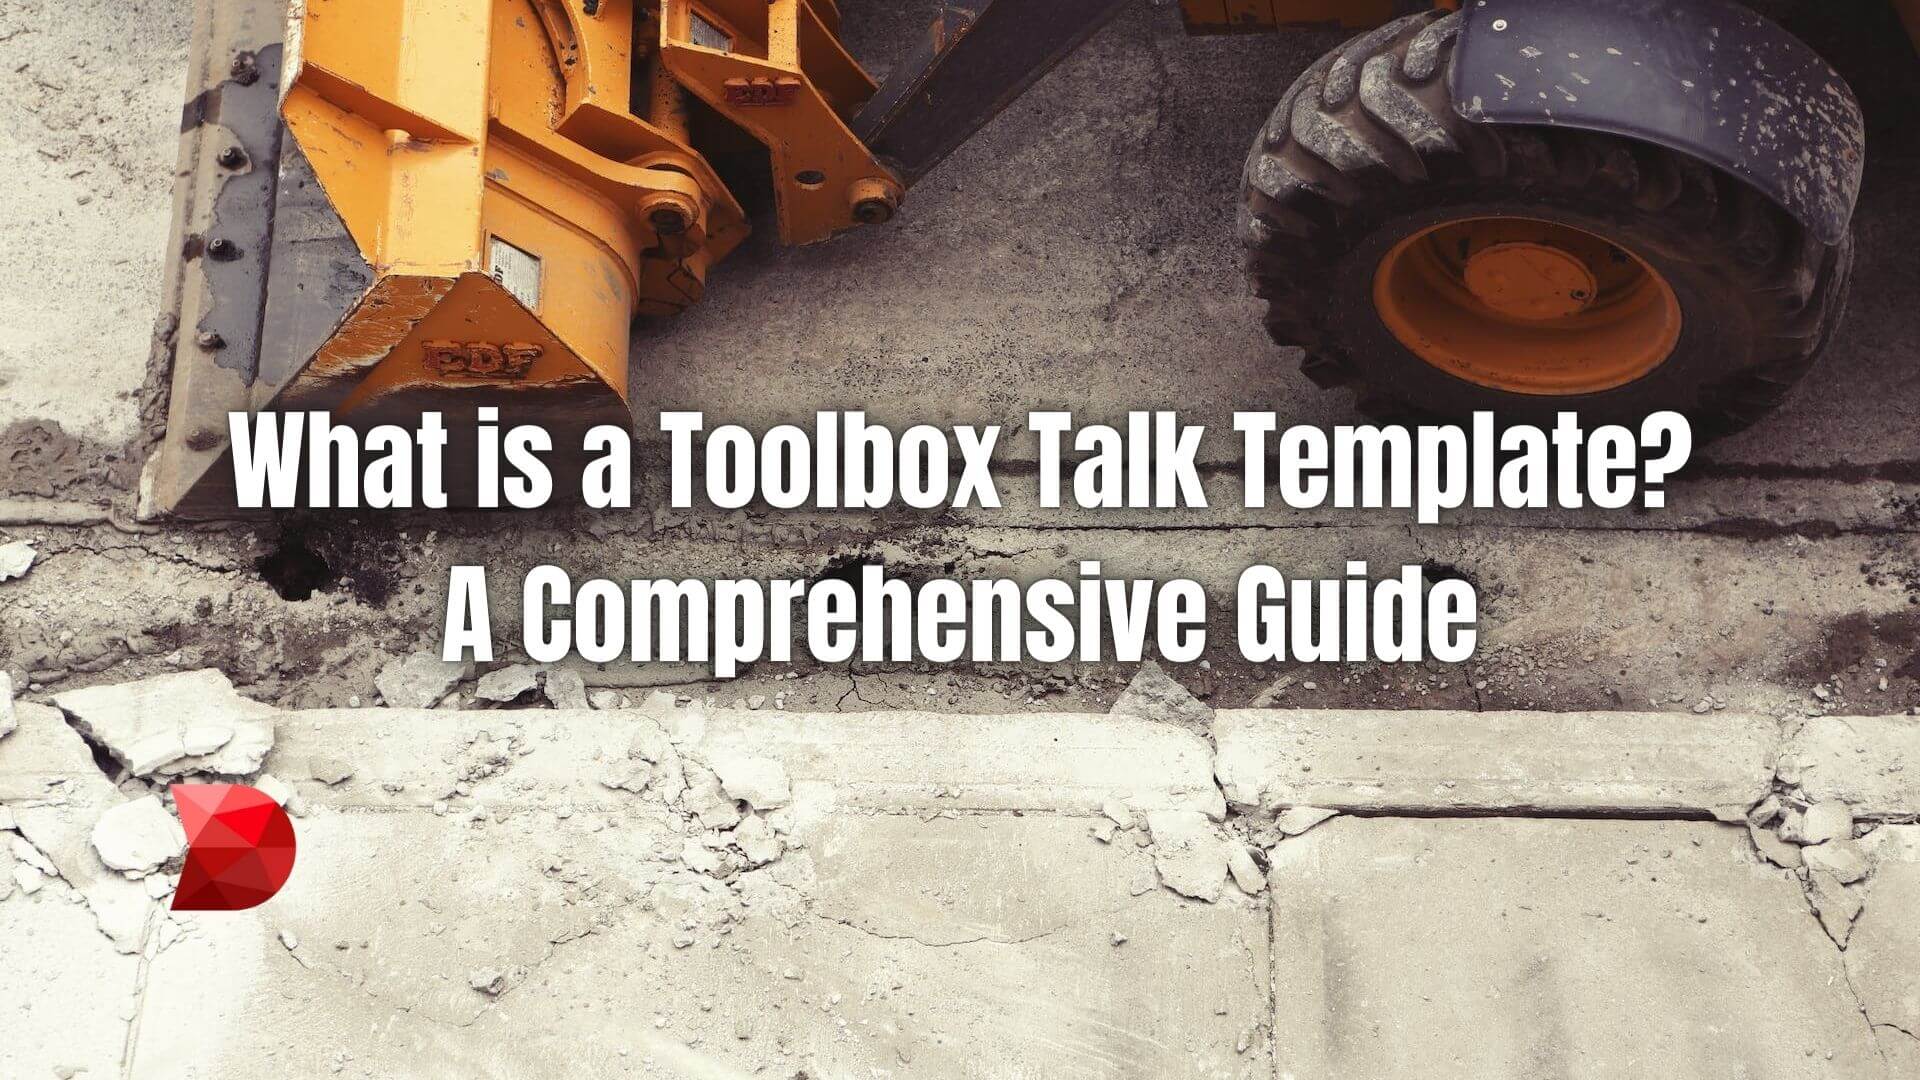 In this article, you'll learn about how to create a paperless toolbox talk template that is efficient and effective. Read here to learn more!